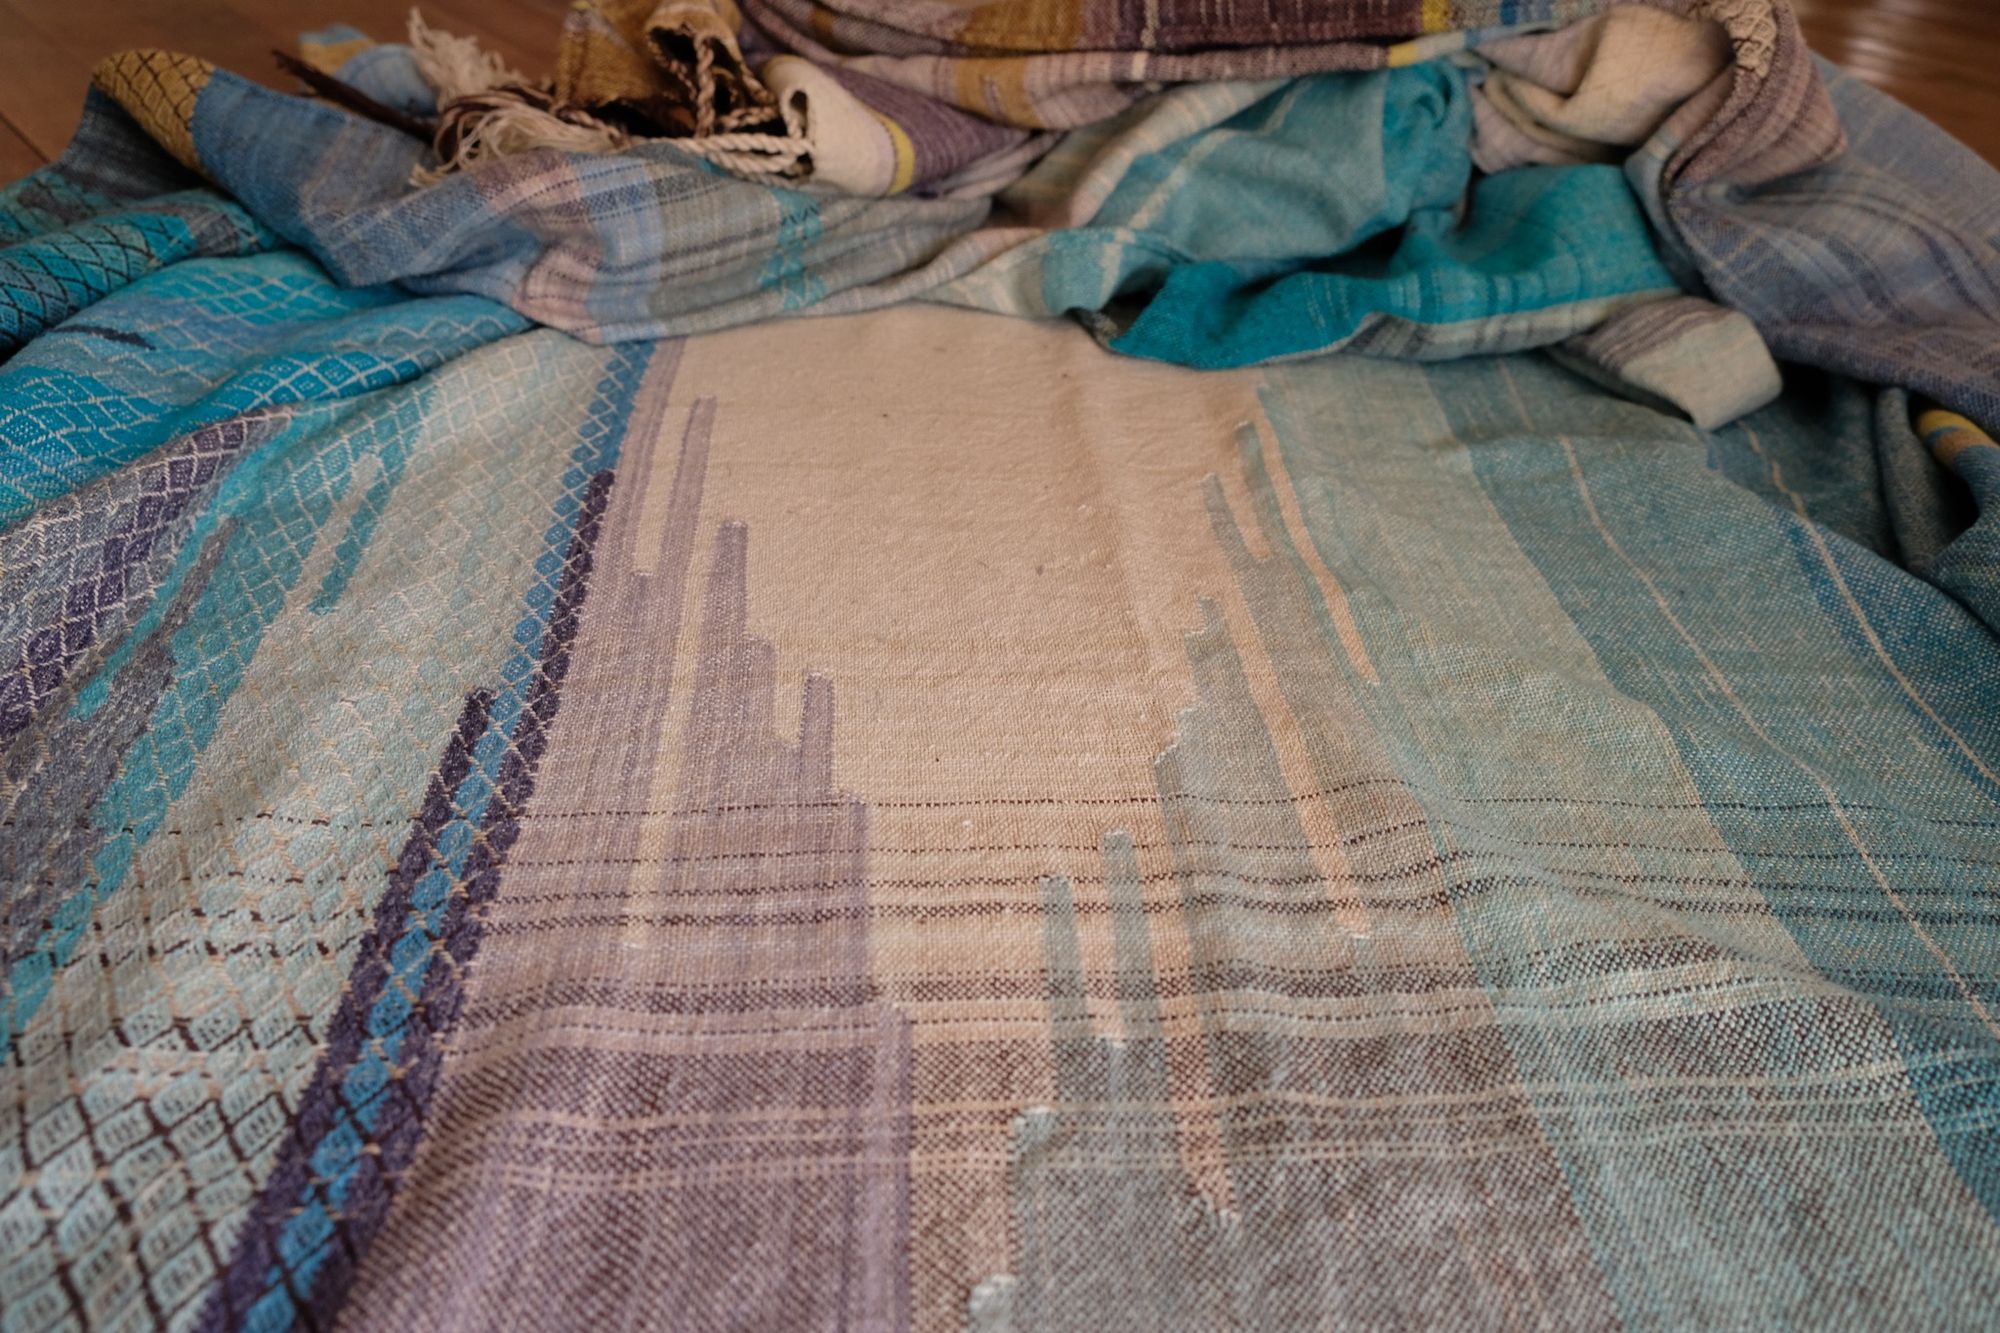 Blue and white handwoven fabric laid out on the ground